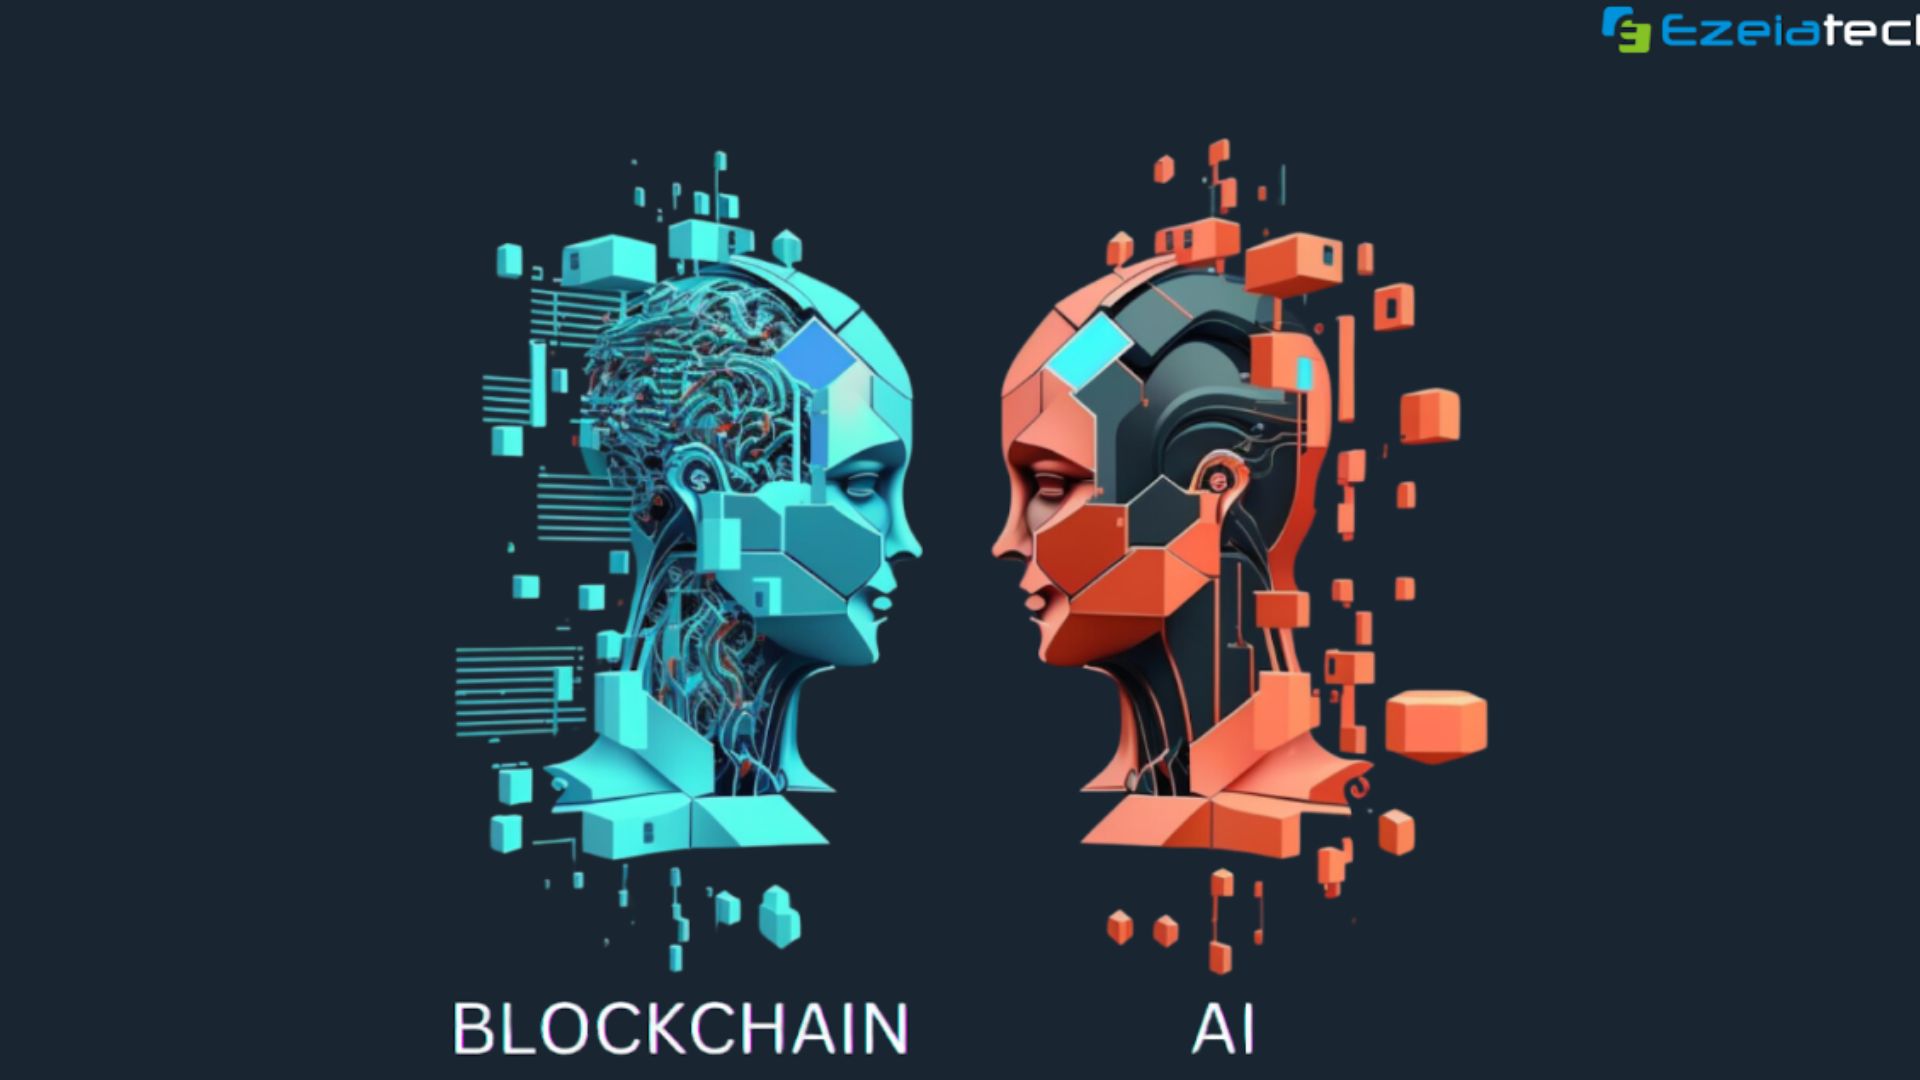 Image showing Blockchain and AI together to insinuate them teaming up